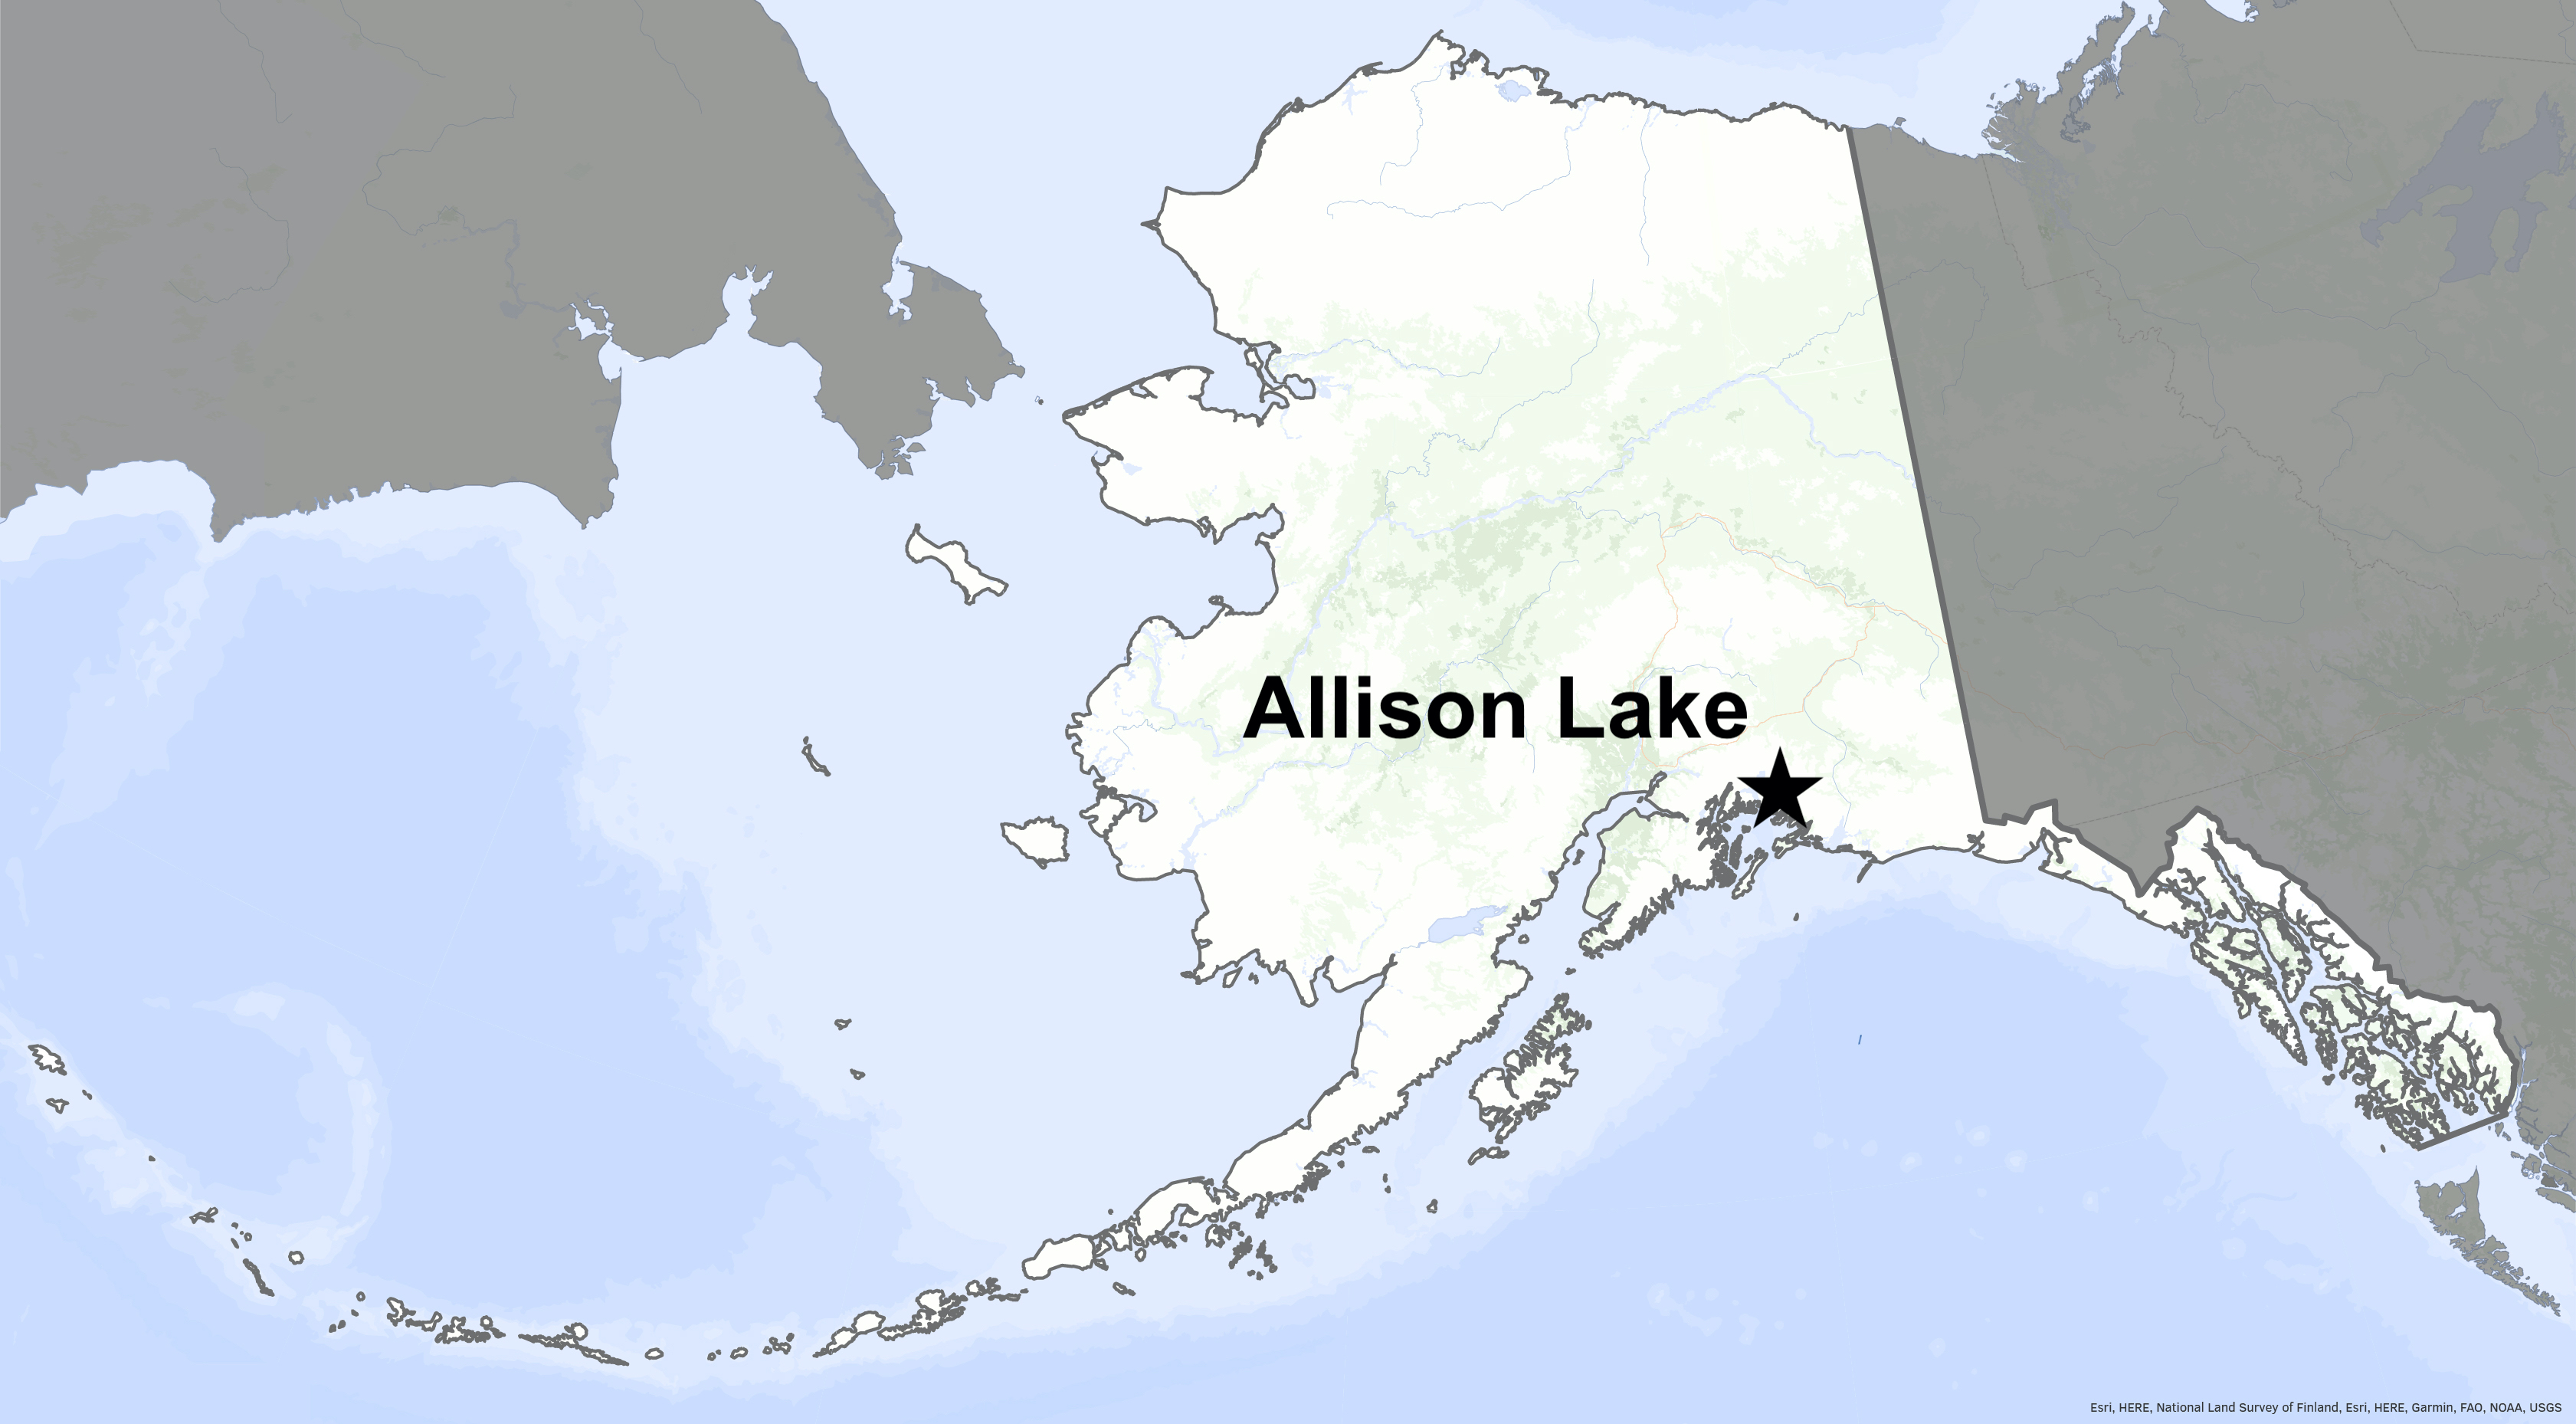 A star on a map of Alaska indicates the location of Allison Lake near the southern central coast.